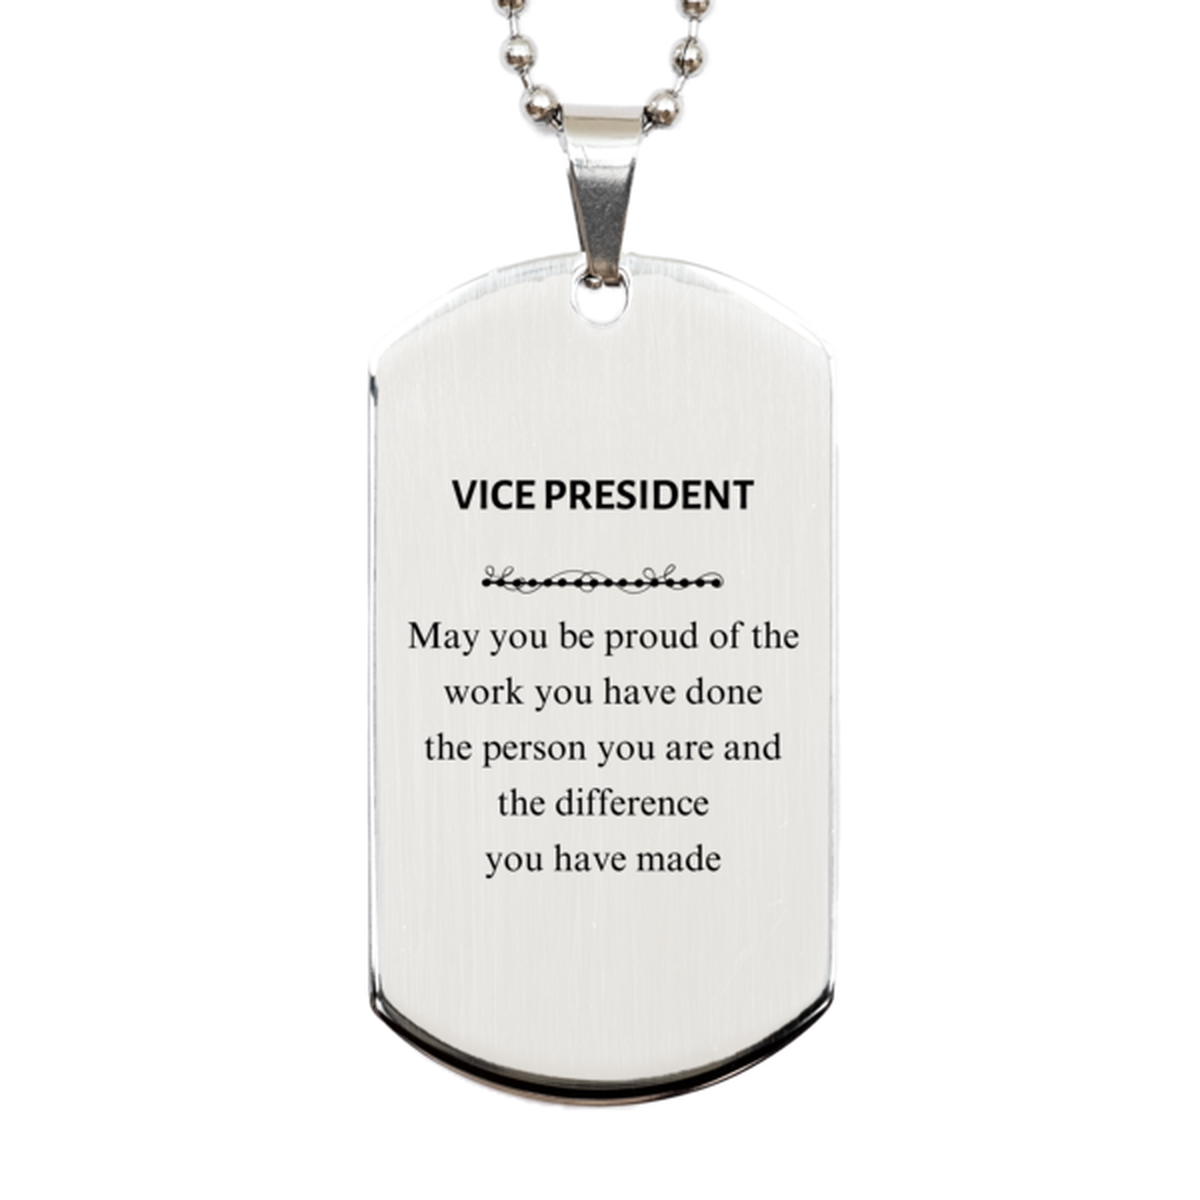 Vice President May you be proud of the work you have done, Retirement Vice President Silver Dog Tag for Colleague Appreciation Gifts Amazing for Vice President